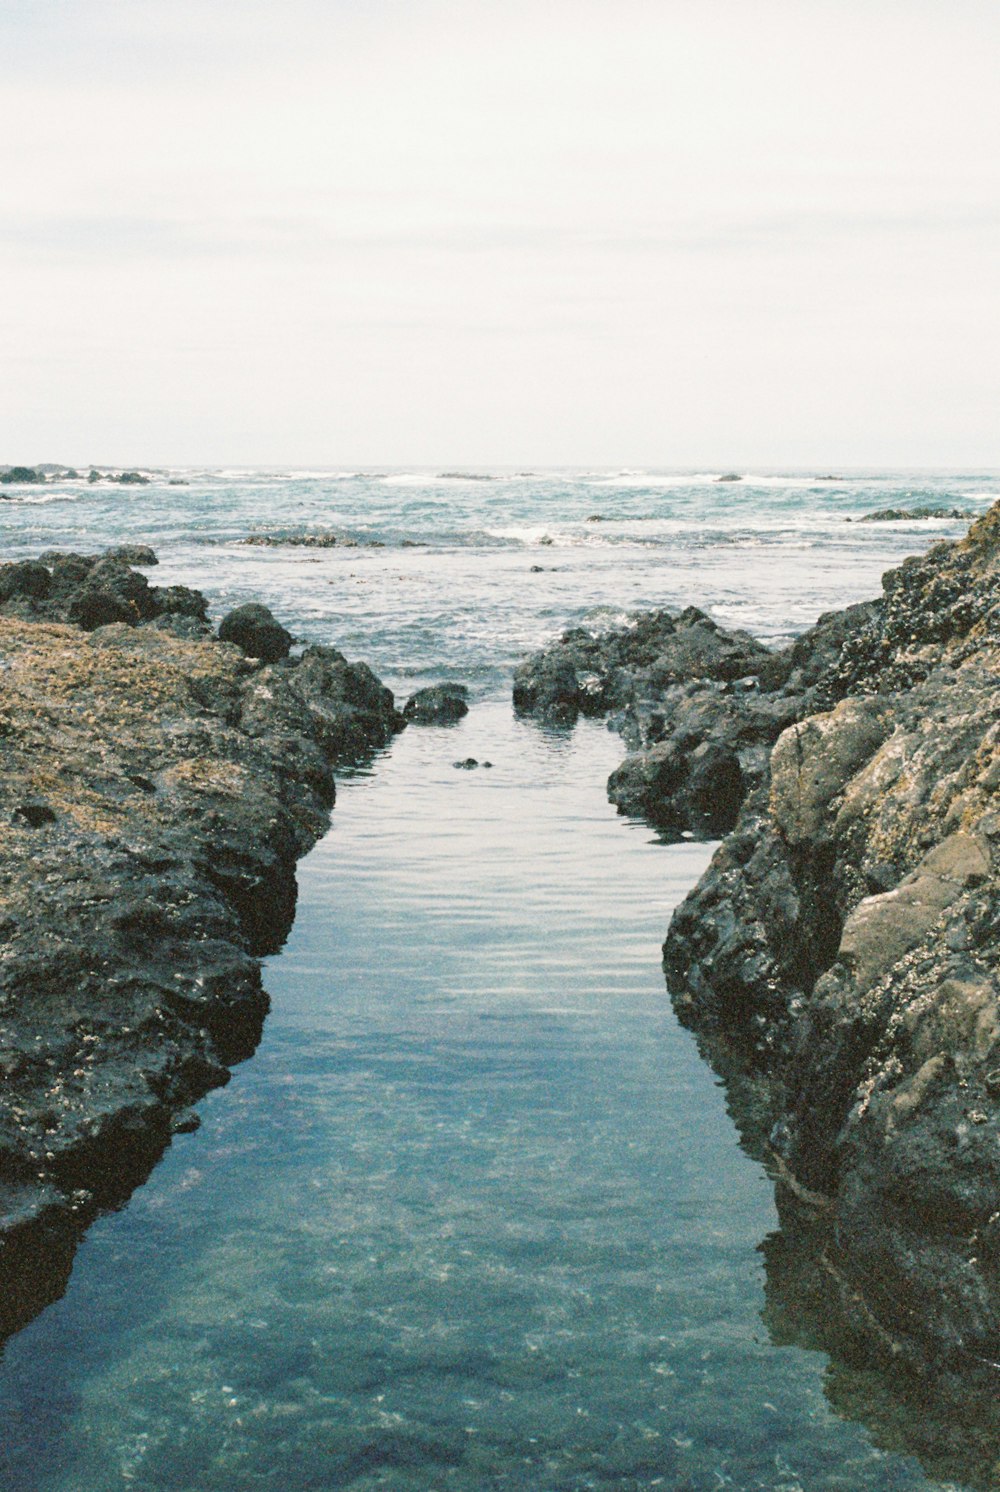 a body of water surrounded by large rocks